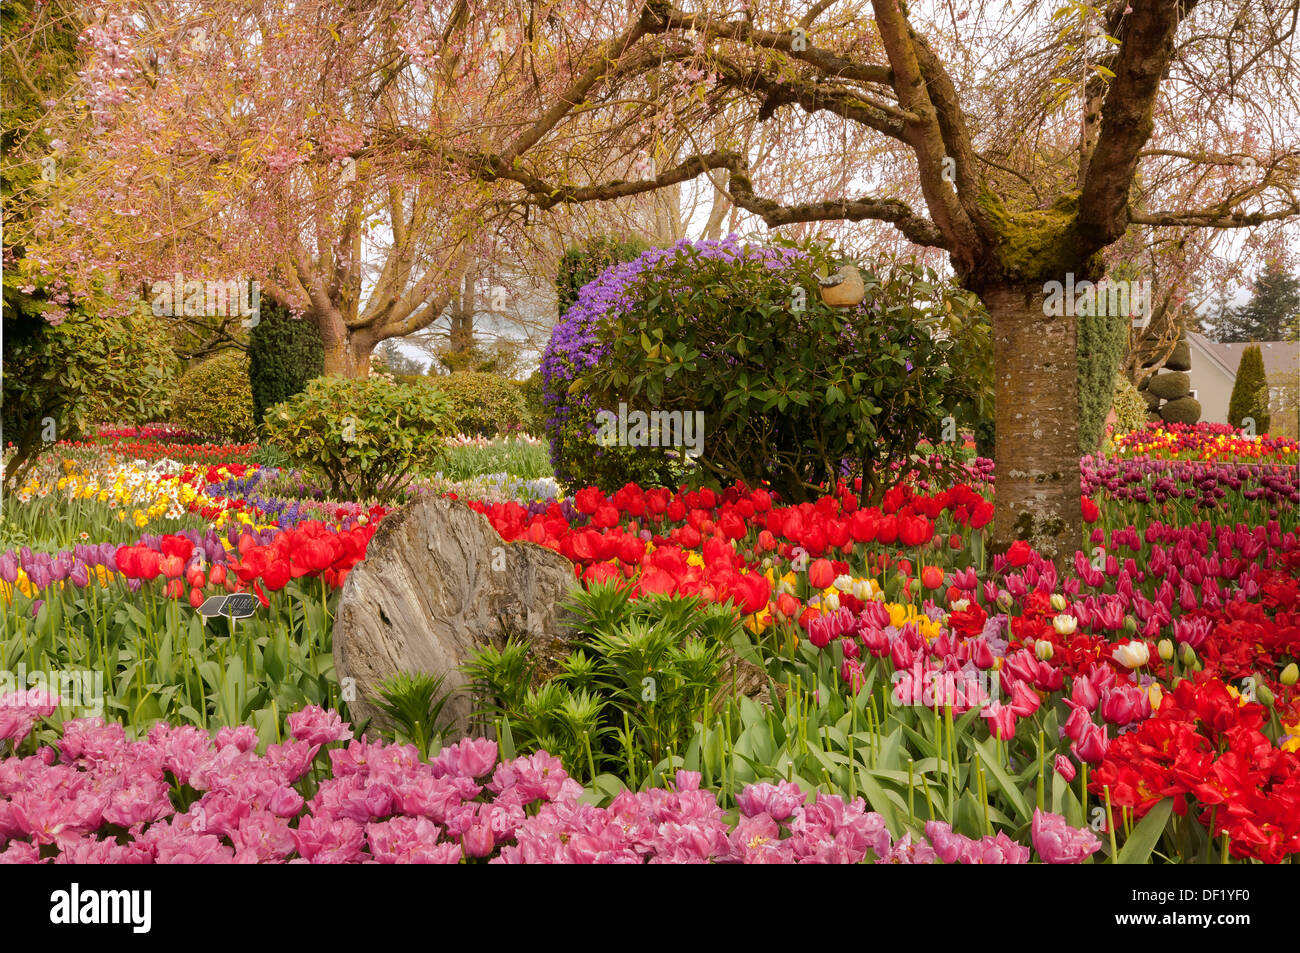 WASHINGTON - Mixed bed of tulips, daffodils and rhododendrons blooming in a display garden at RoozenGaarde Bulb Farm. Stock Photo